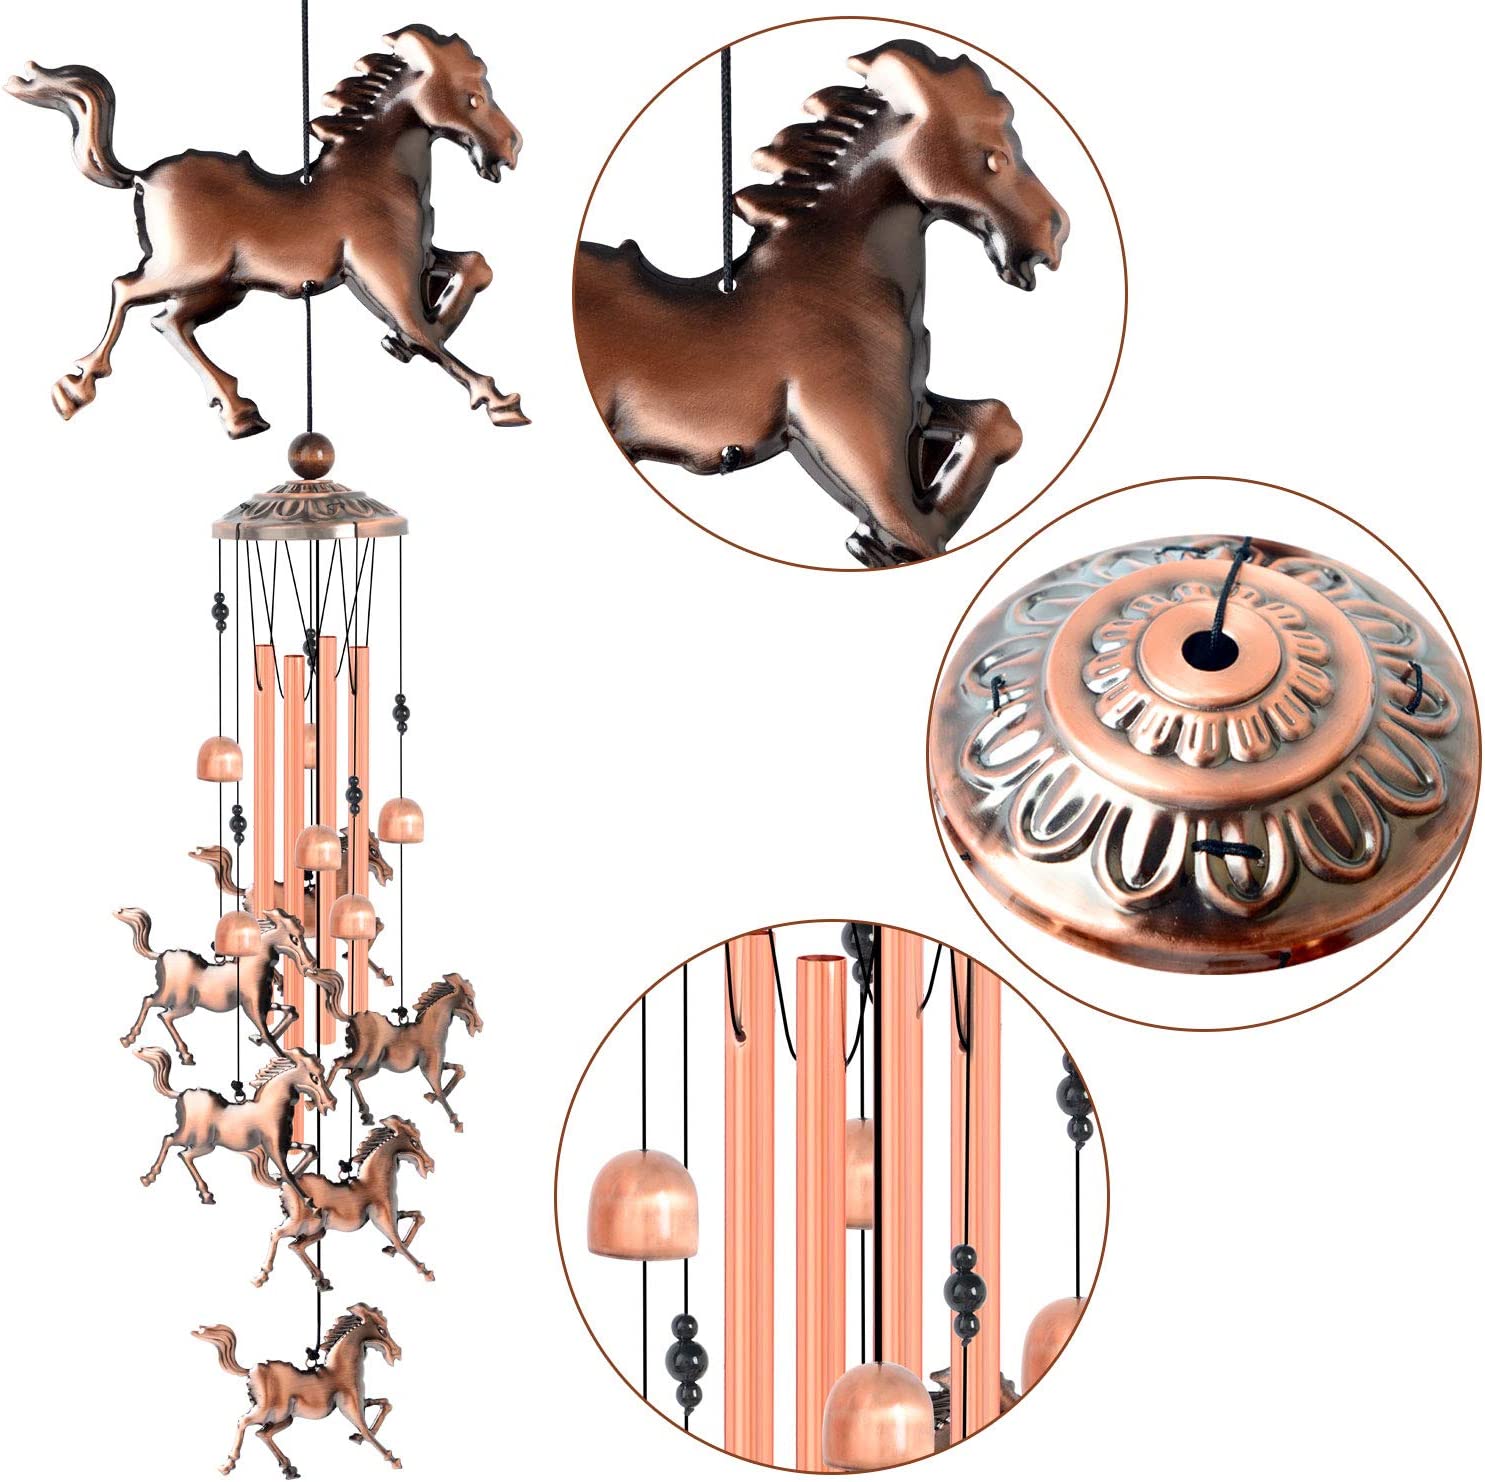 (🔥SUMMER HOT SALE - 50% OFF) Pure hand-made Copper Horse Wind Chimes - BUY 2 FREE SHIPPING